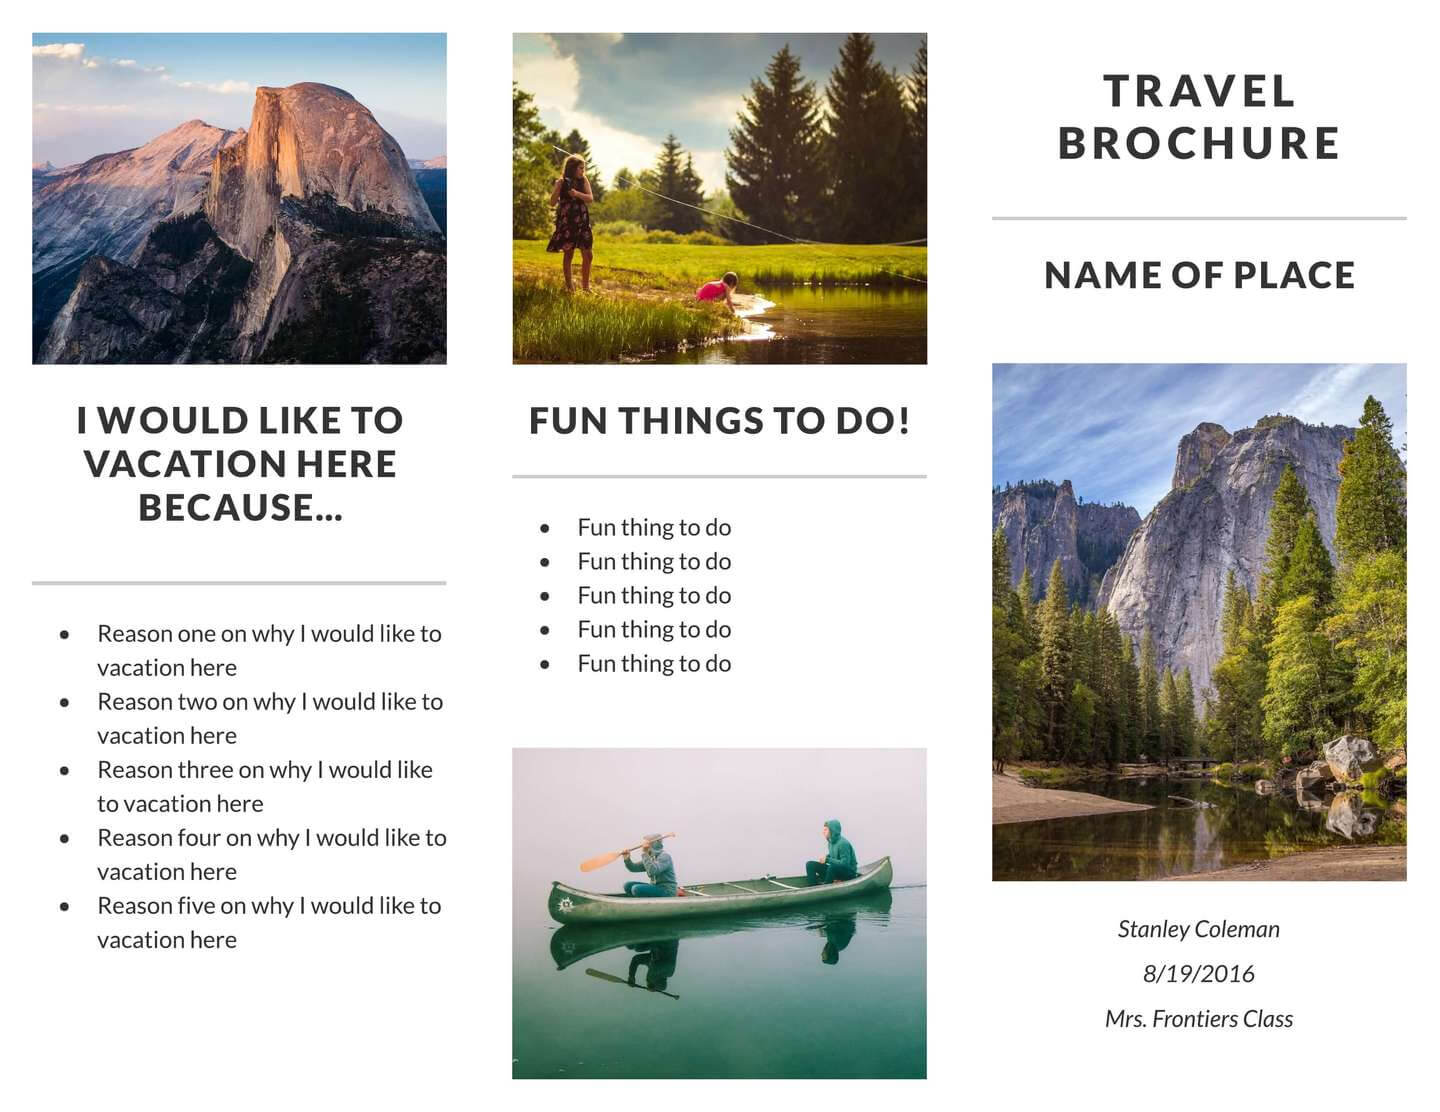 Free Travel Brochure Templates & Examples [8 Free Templates] Inside Travel And Tourism Brochure Templates Free